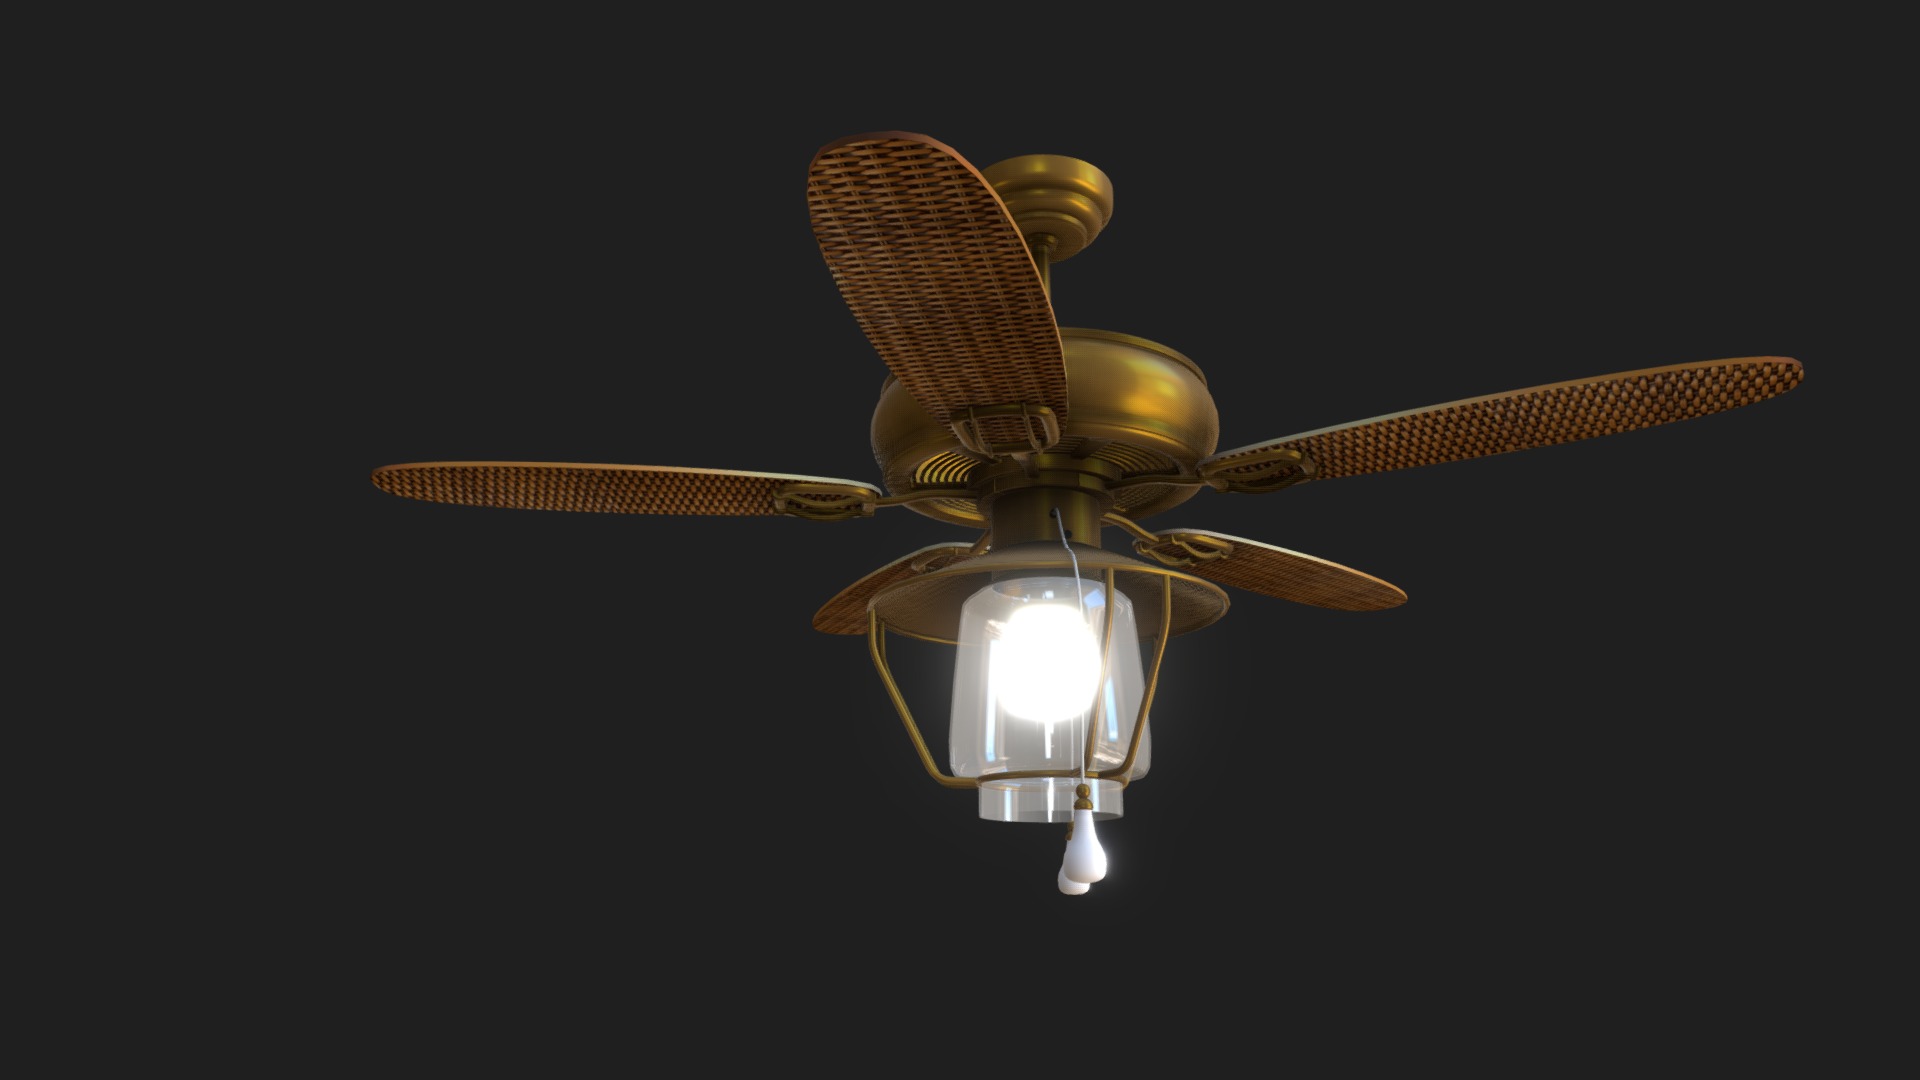 3D model HGP29351 - This is a 3D model of the HGP29351. The 3D model is about a ceiling fan with a light.